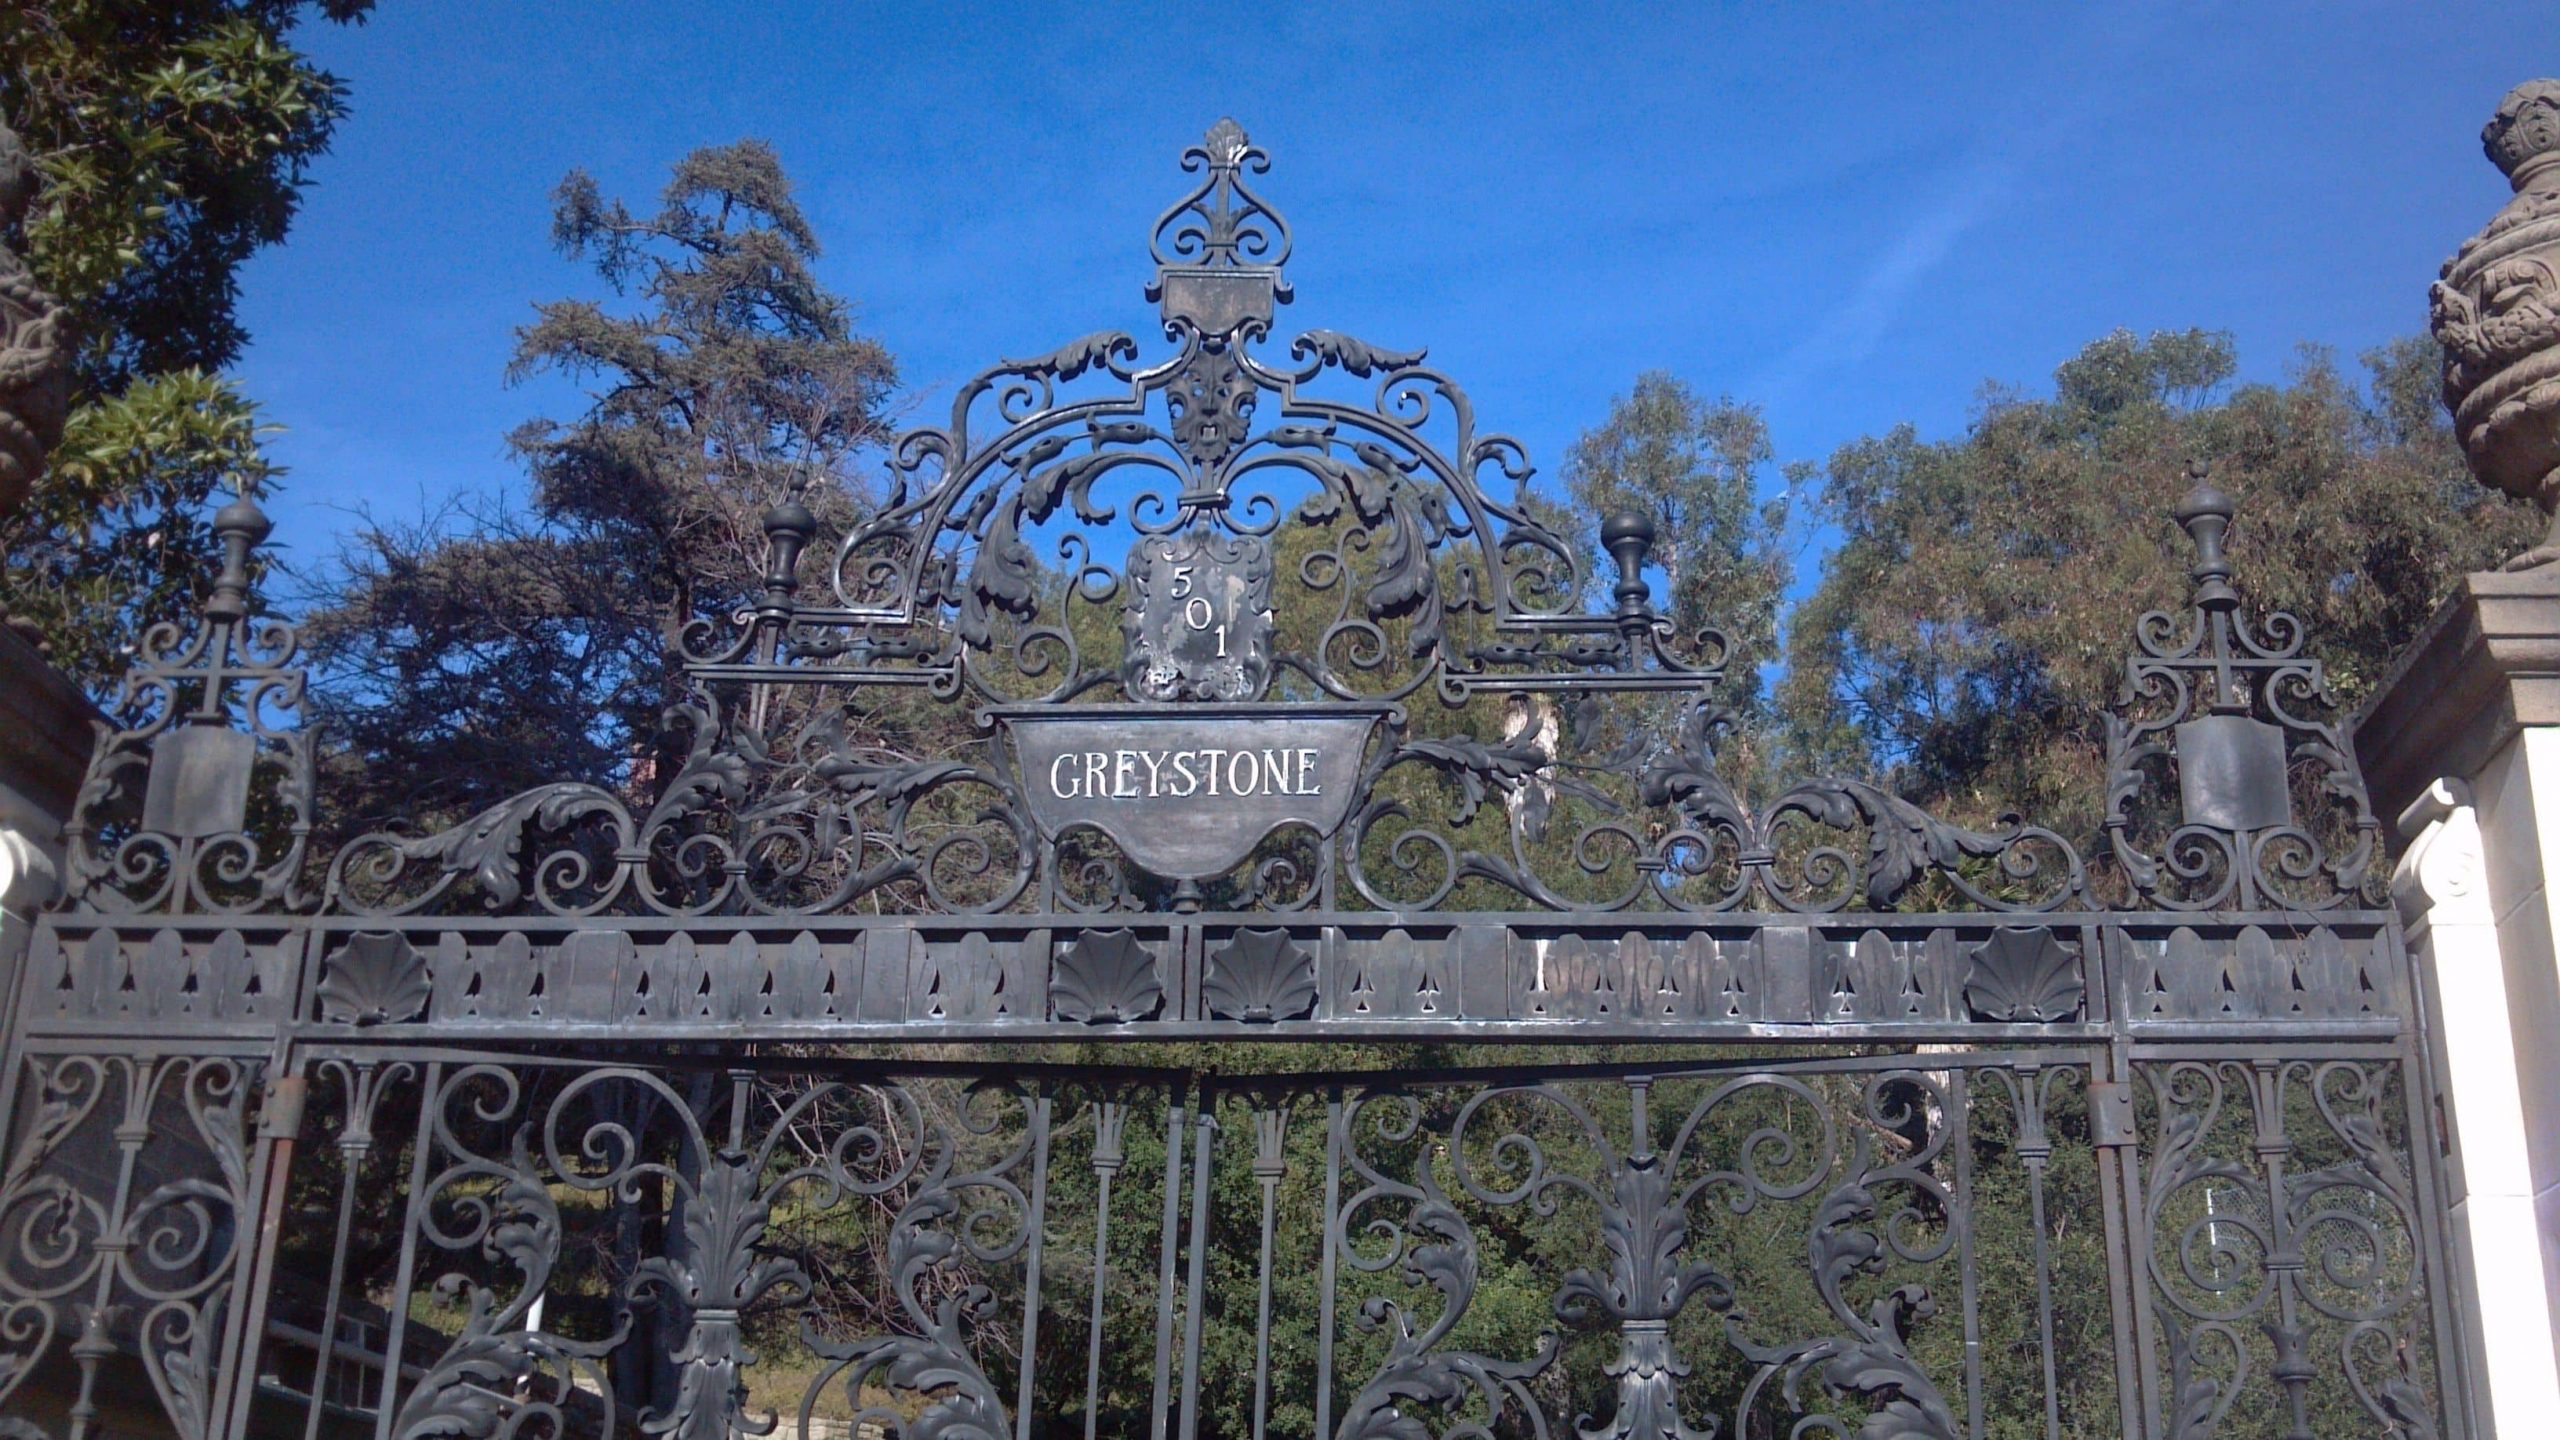 Greystone gates seen on a true crime tour in Los Angeles